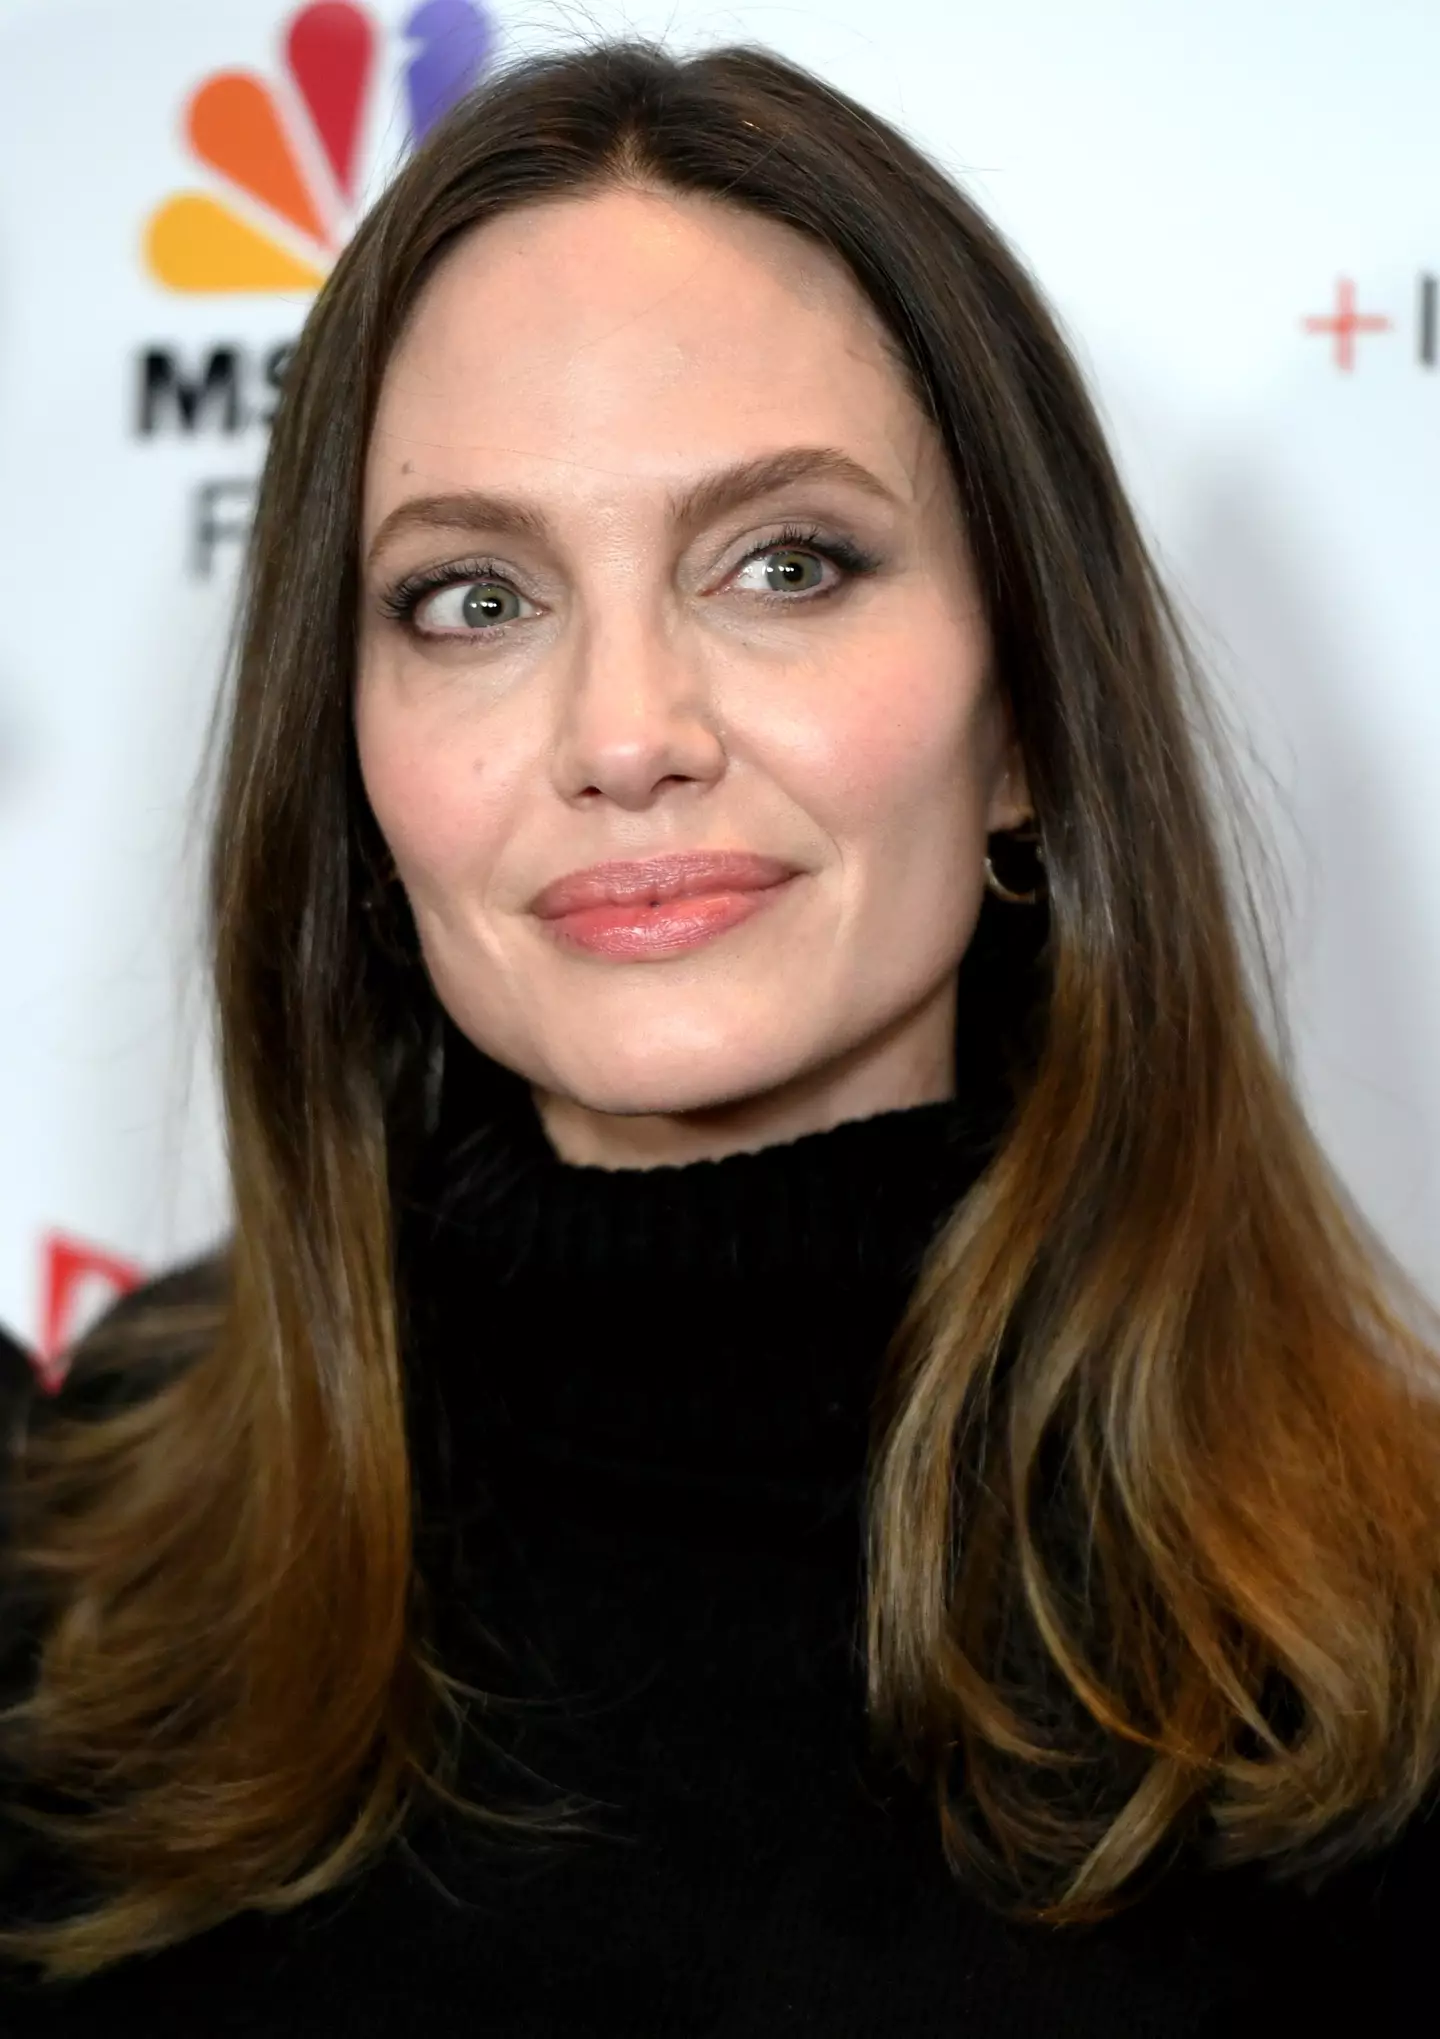 Angelina Jolie has opened up about motherhood and her mental health.